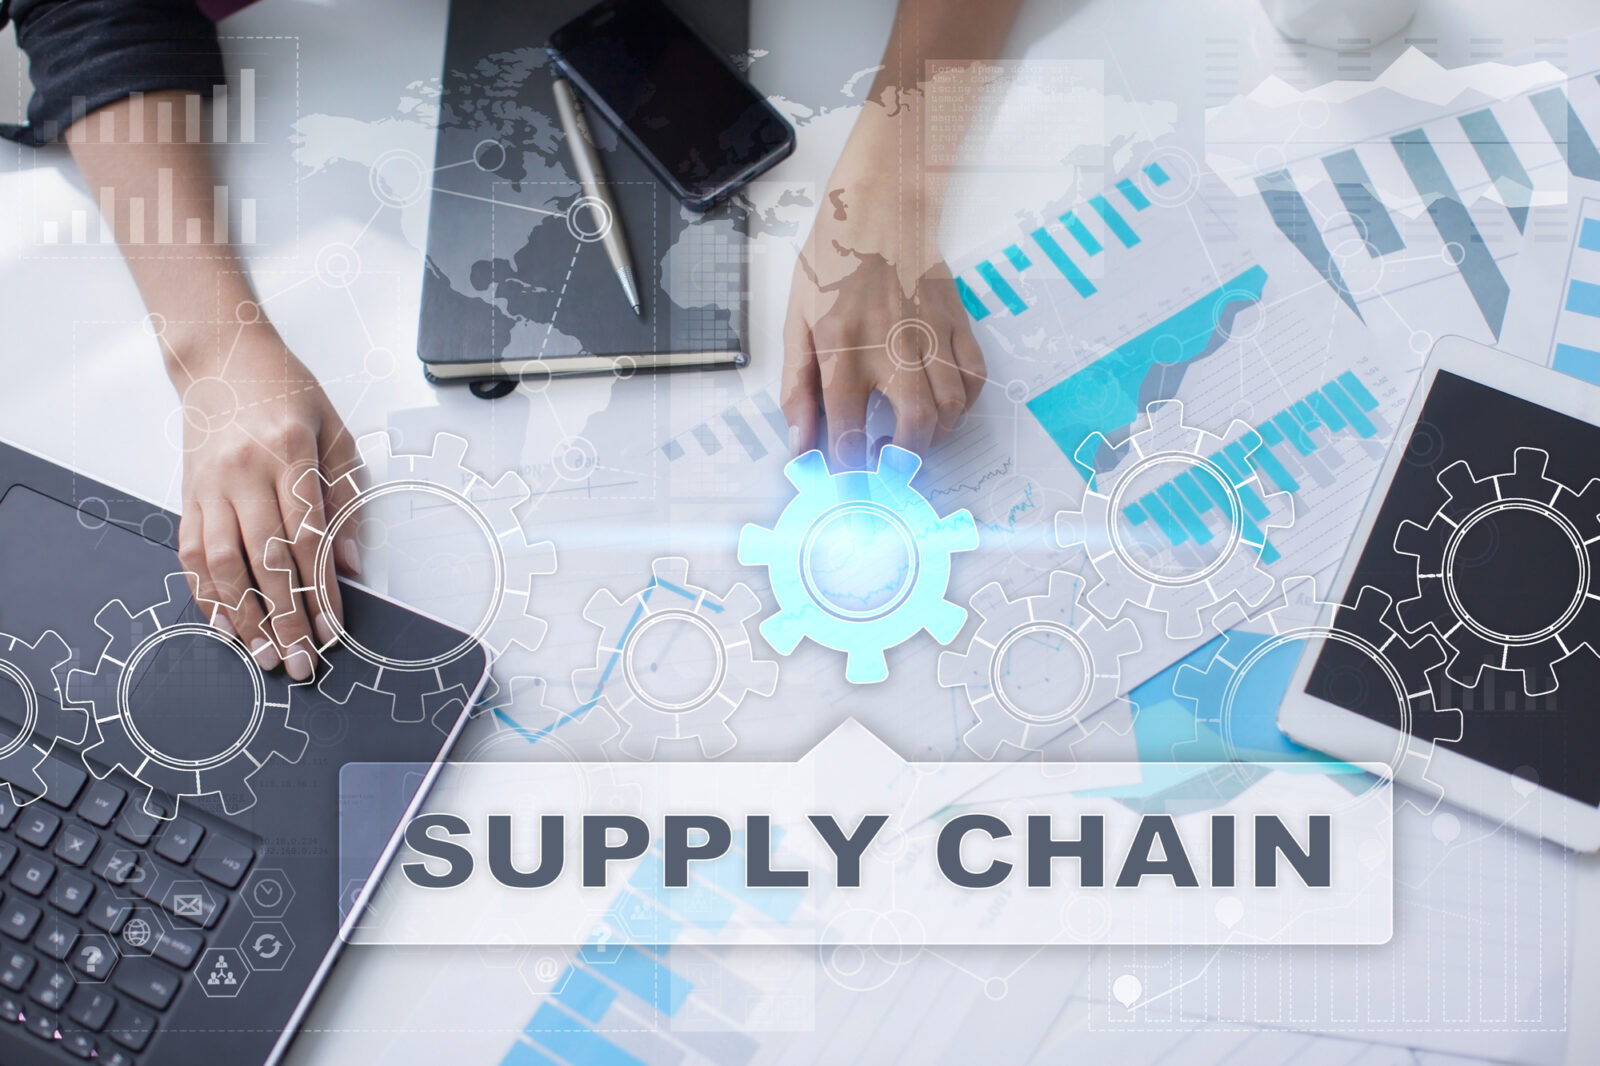 supply chain security